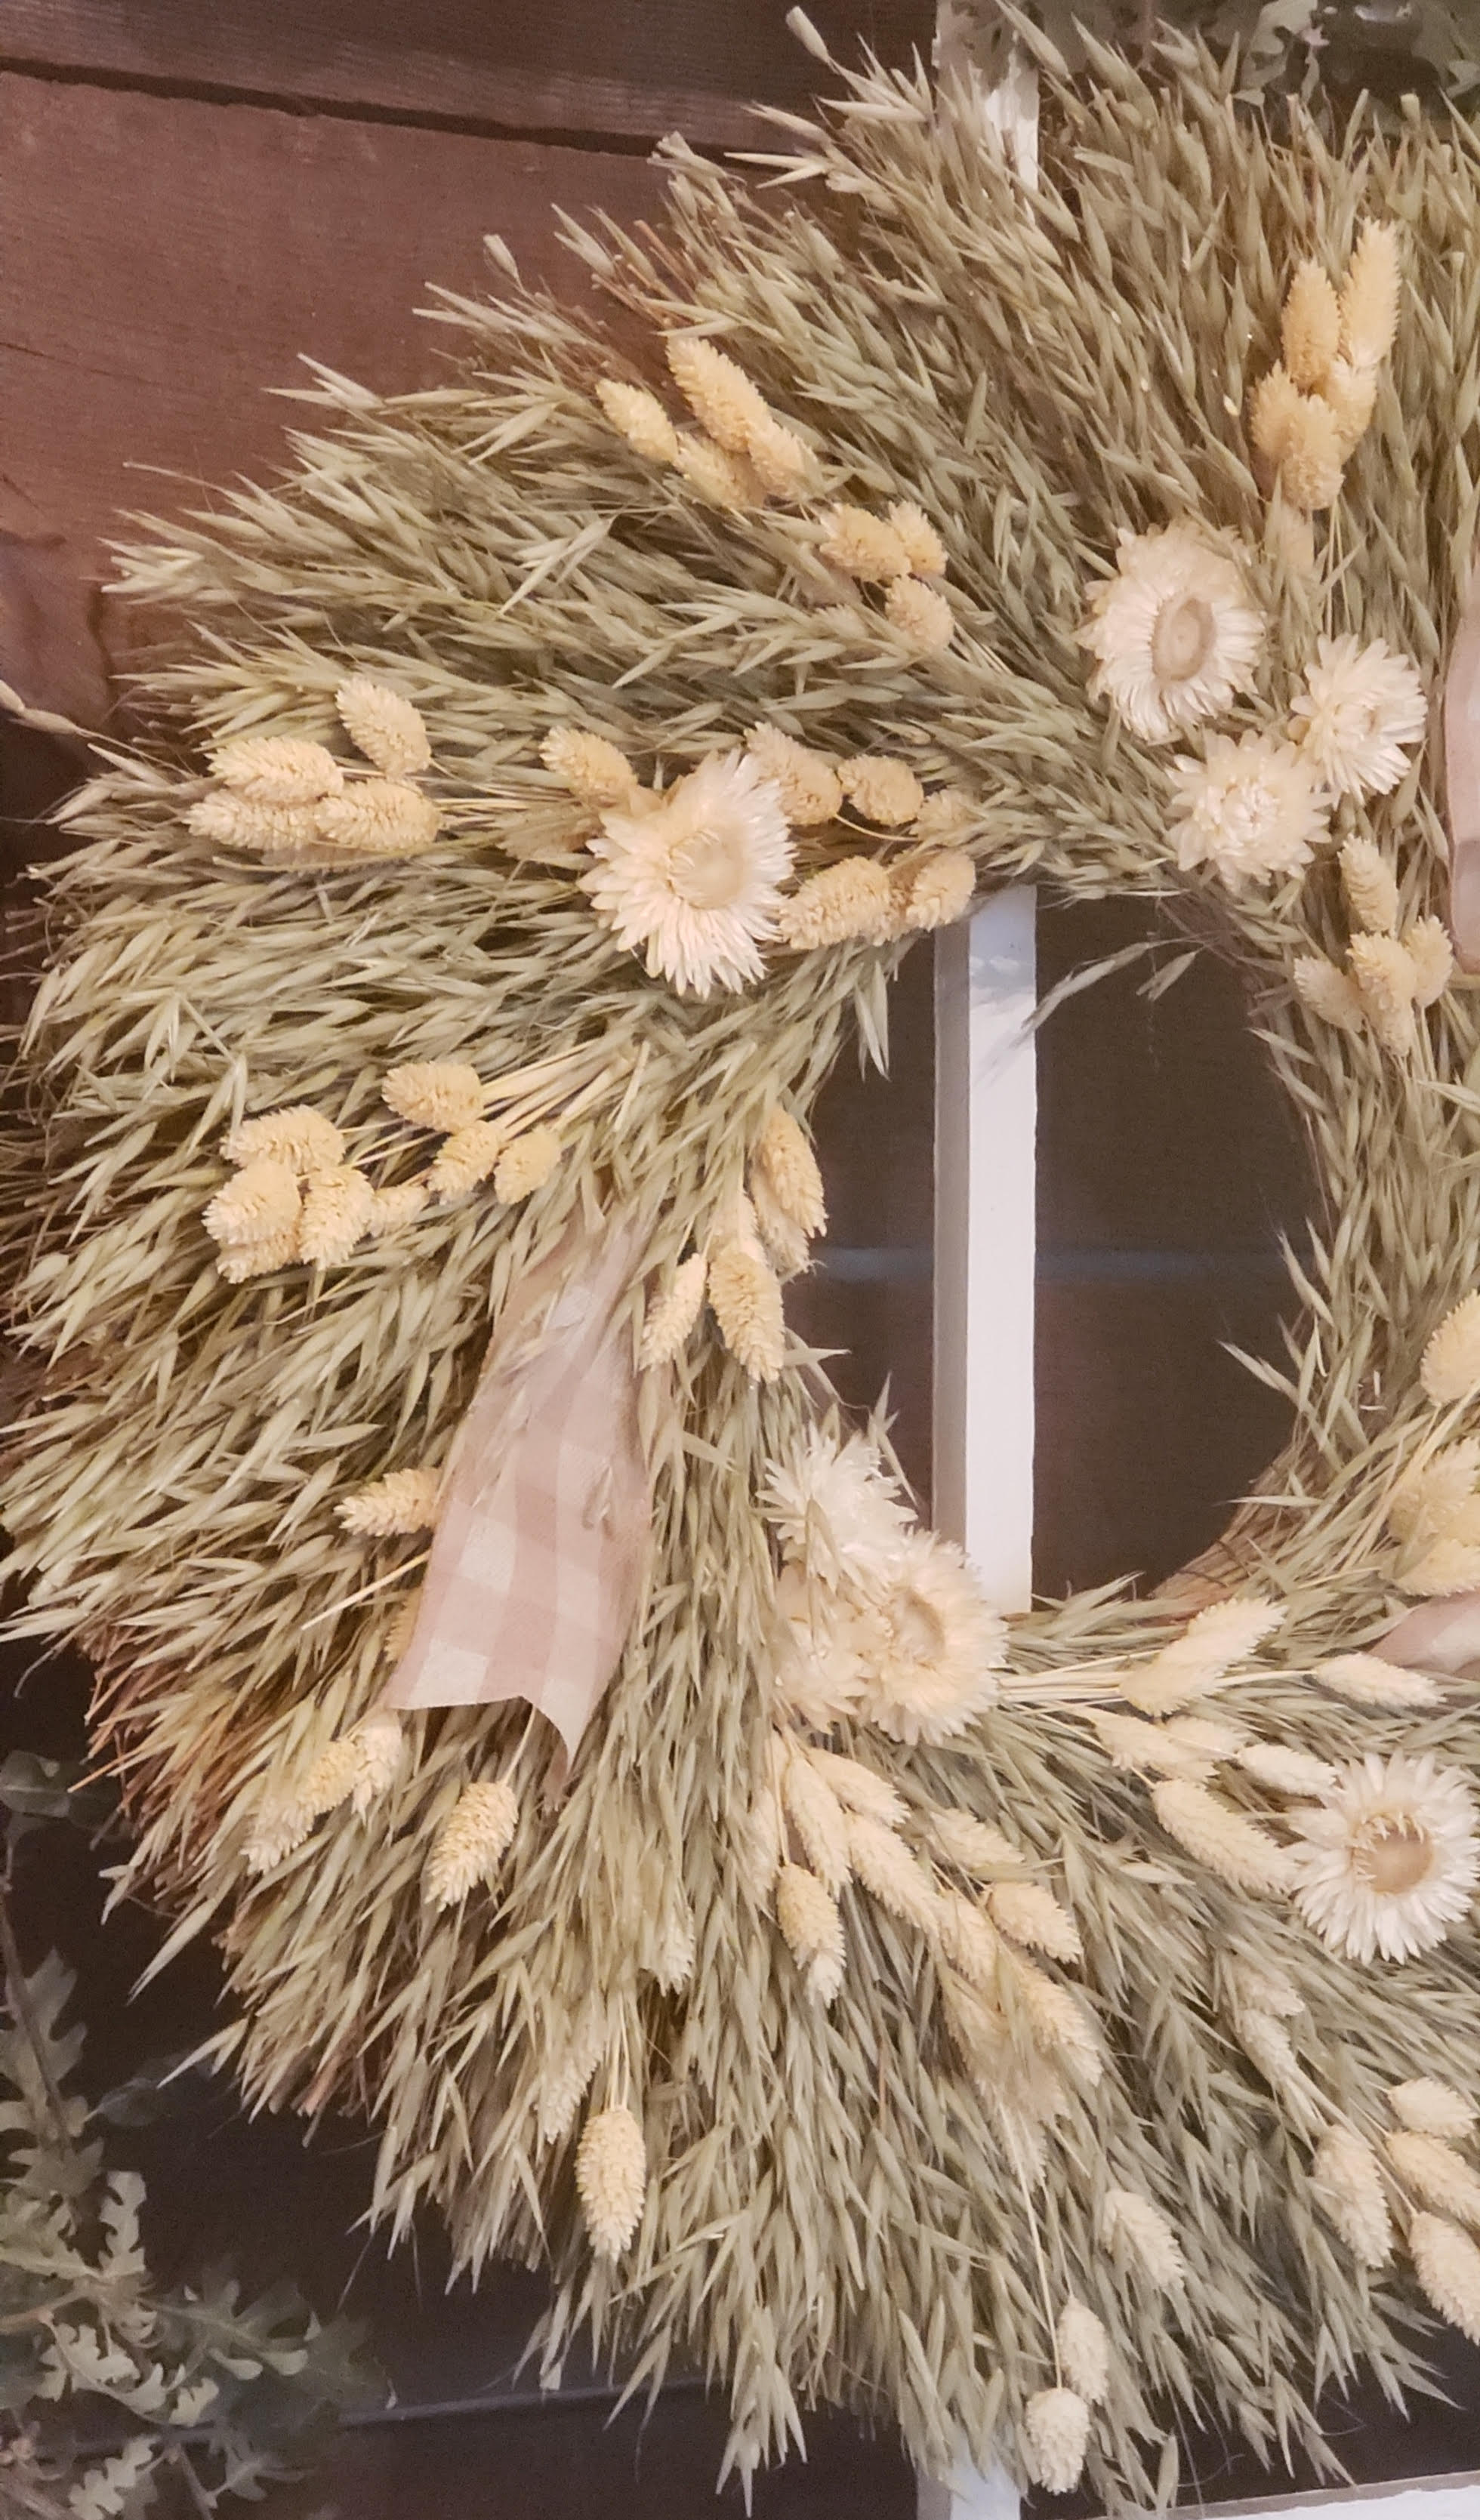 sun kissed oat and straw flower wreath